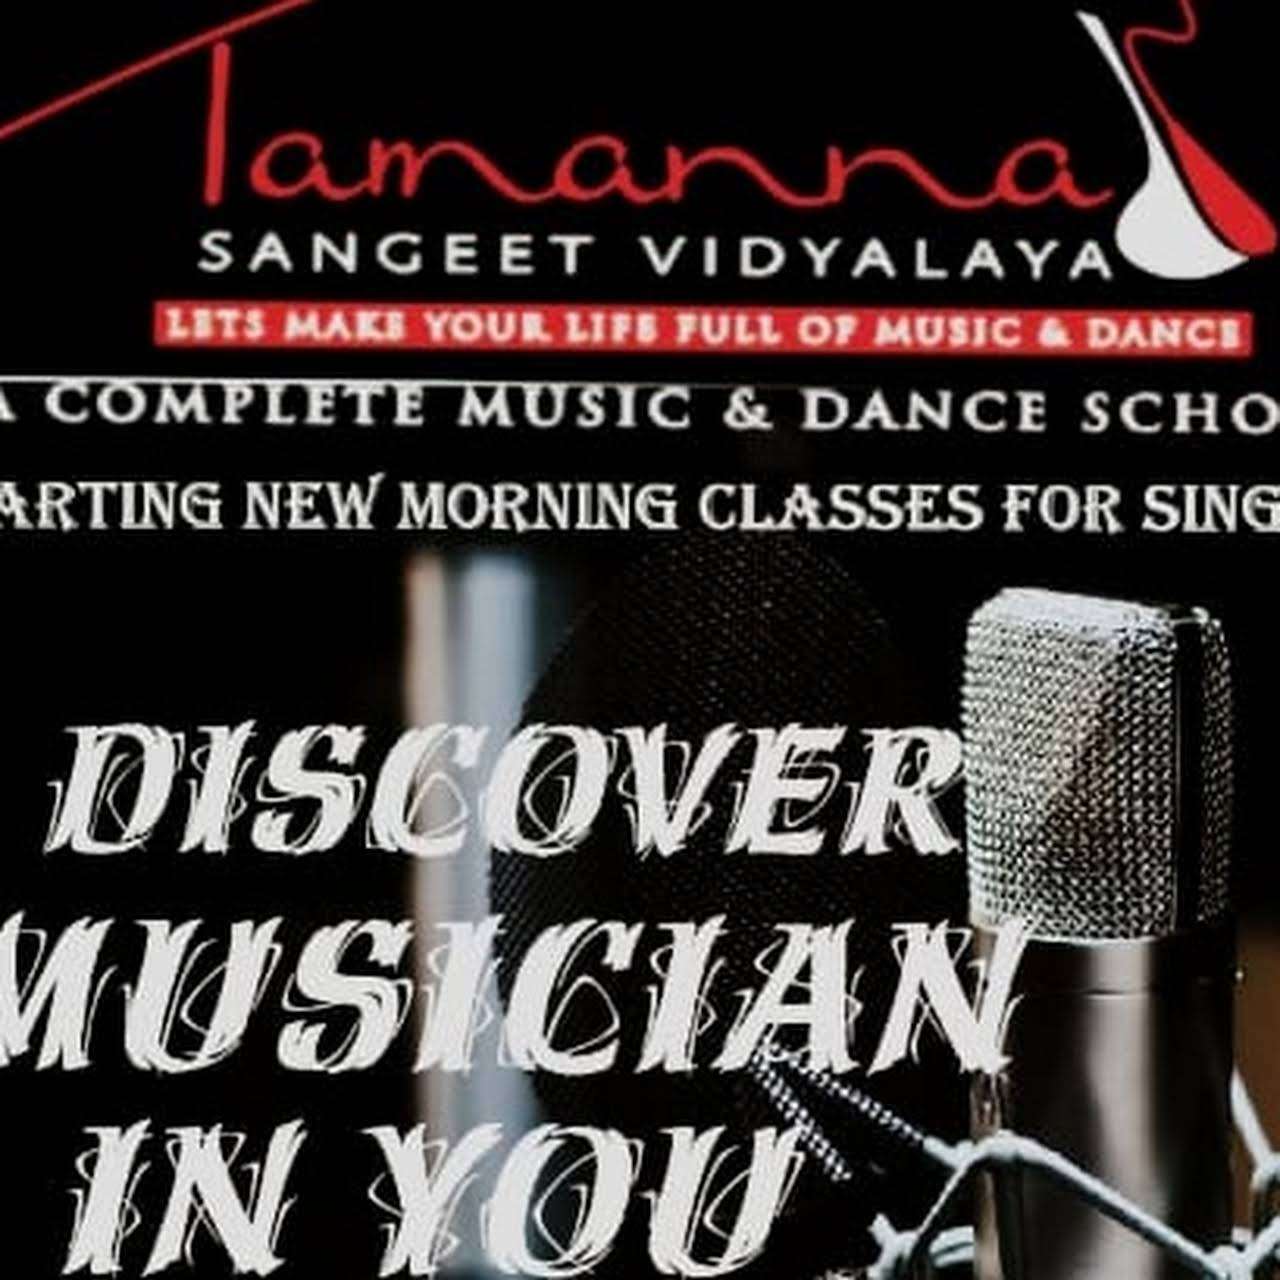 Drum, Flute, Guitar, Hindustani Classical Vocal, Piano; Exp: More than 15 year